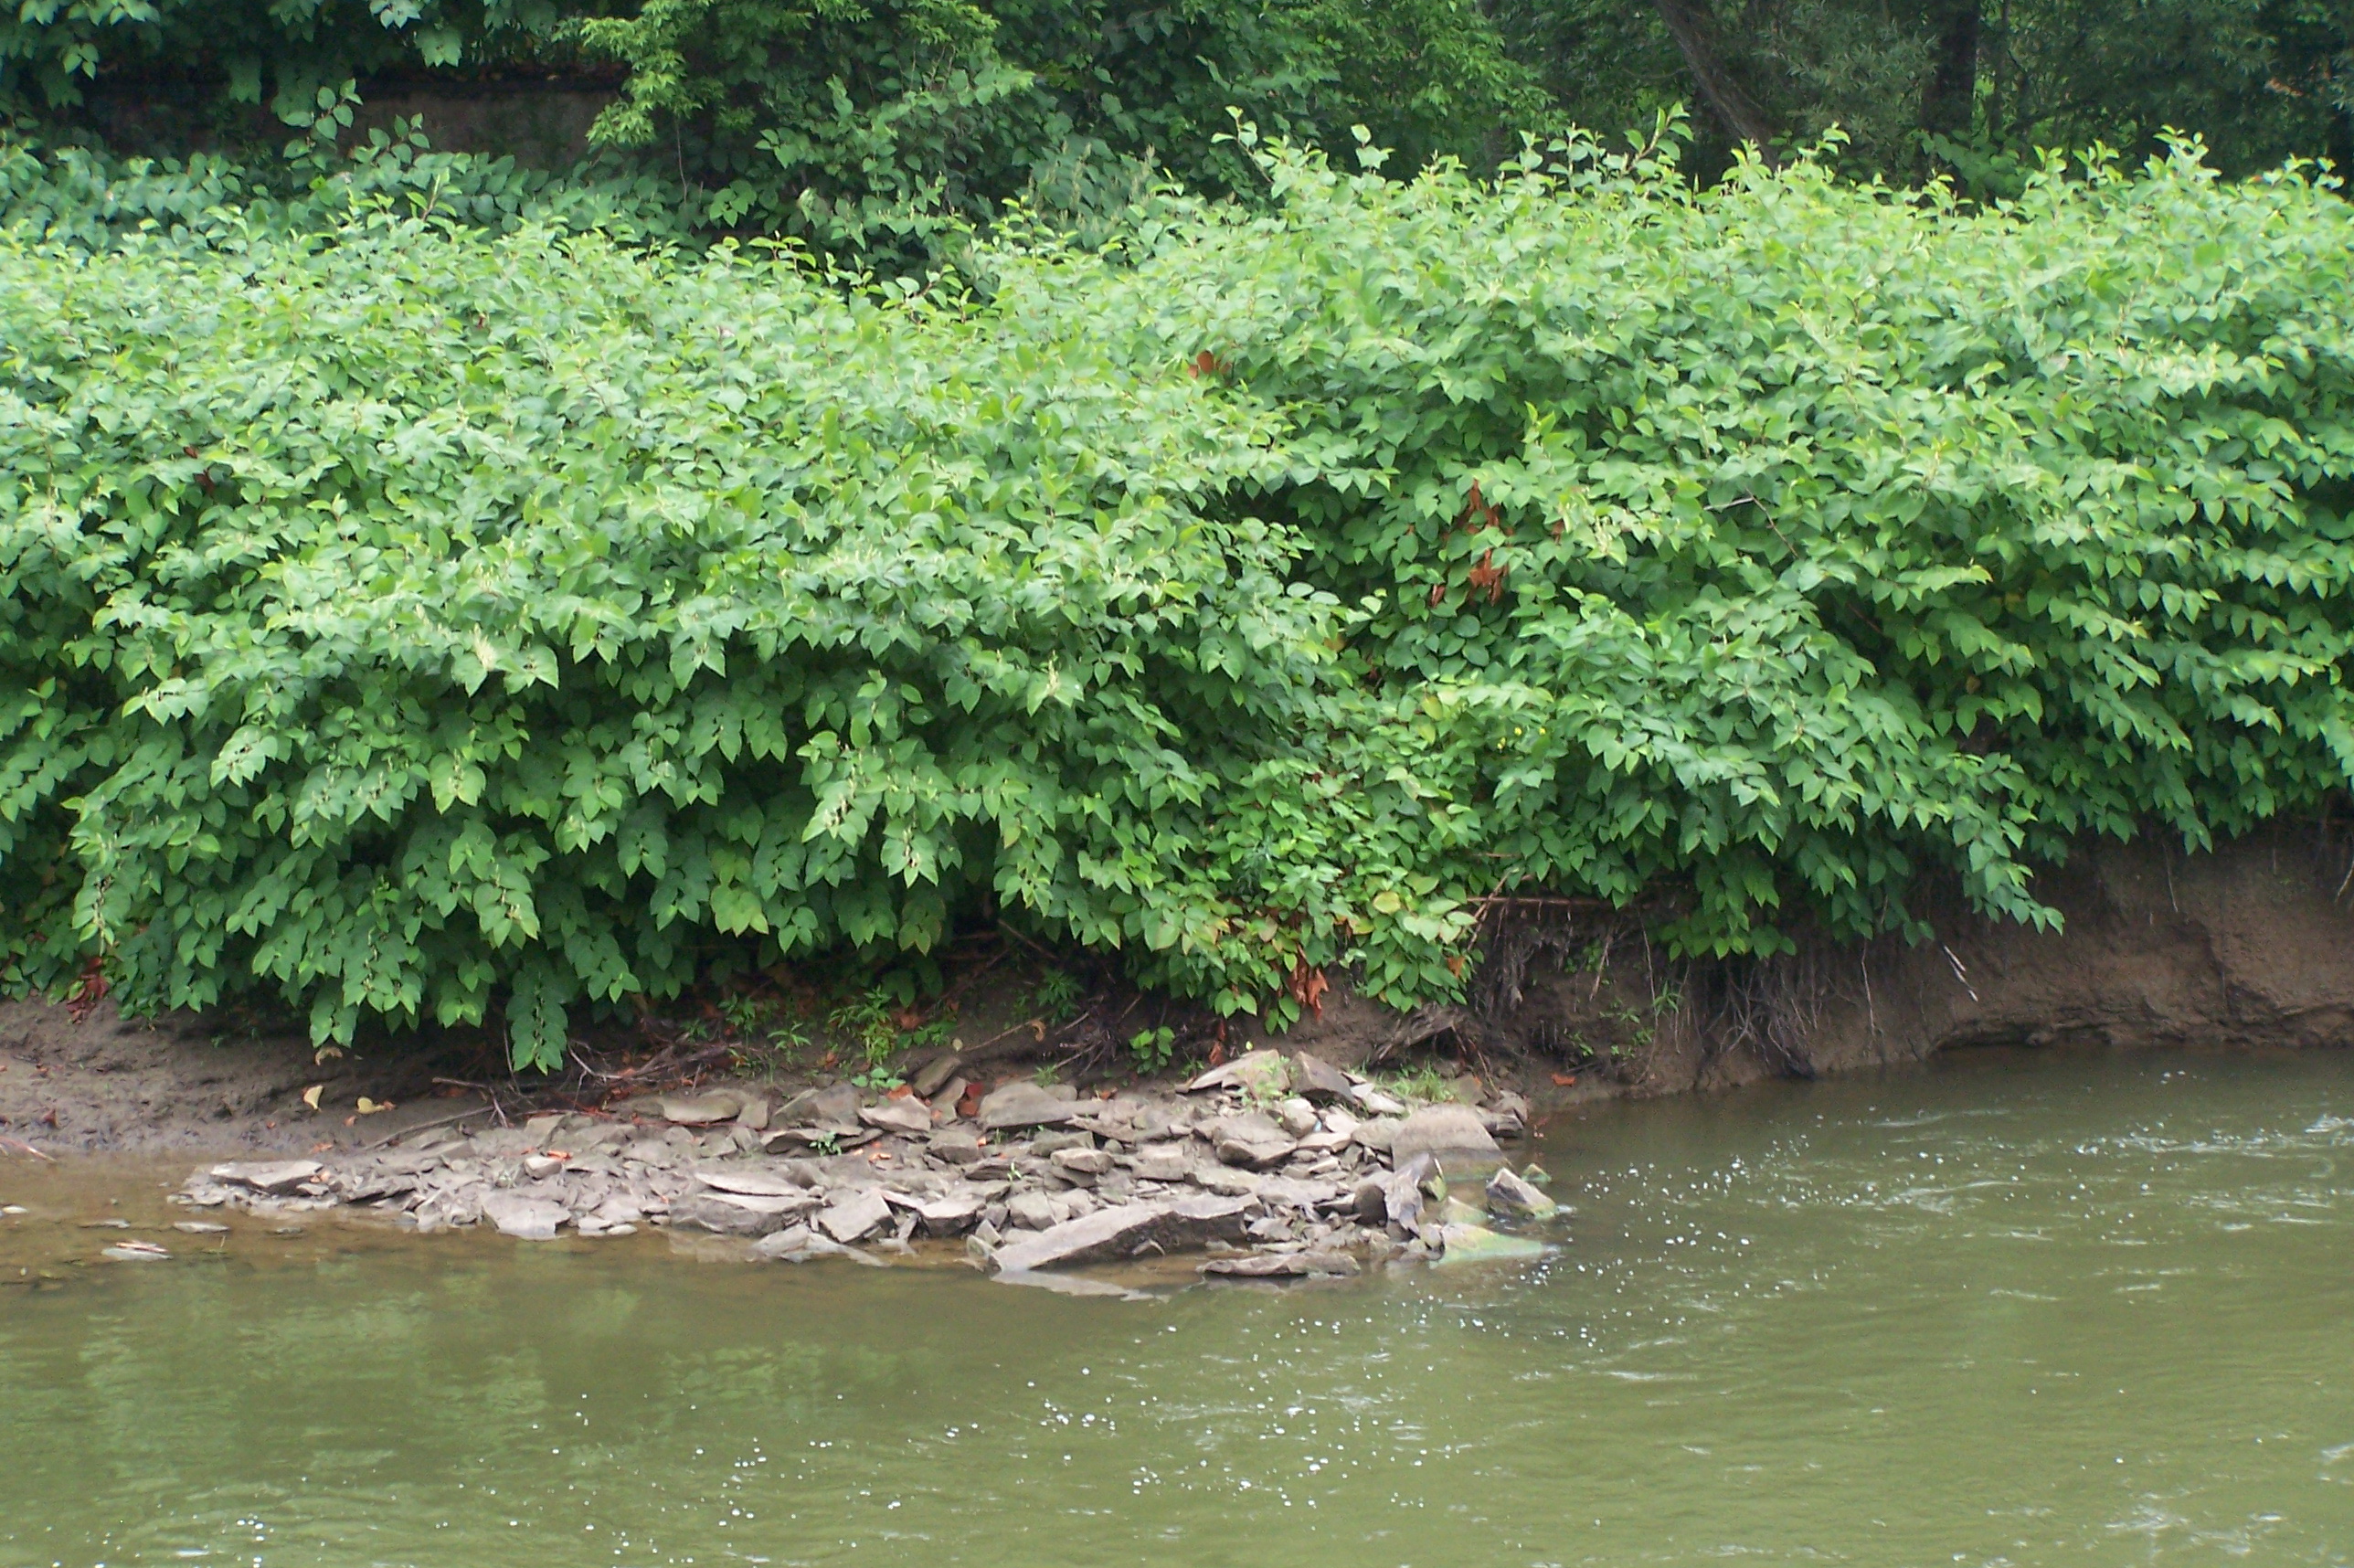 Image of Japanese knotweed next to a river